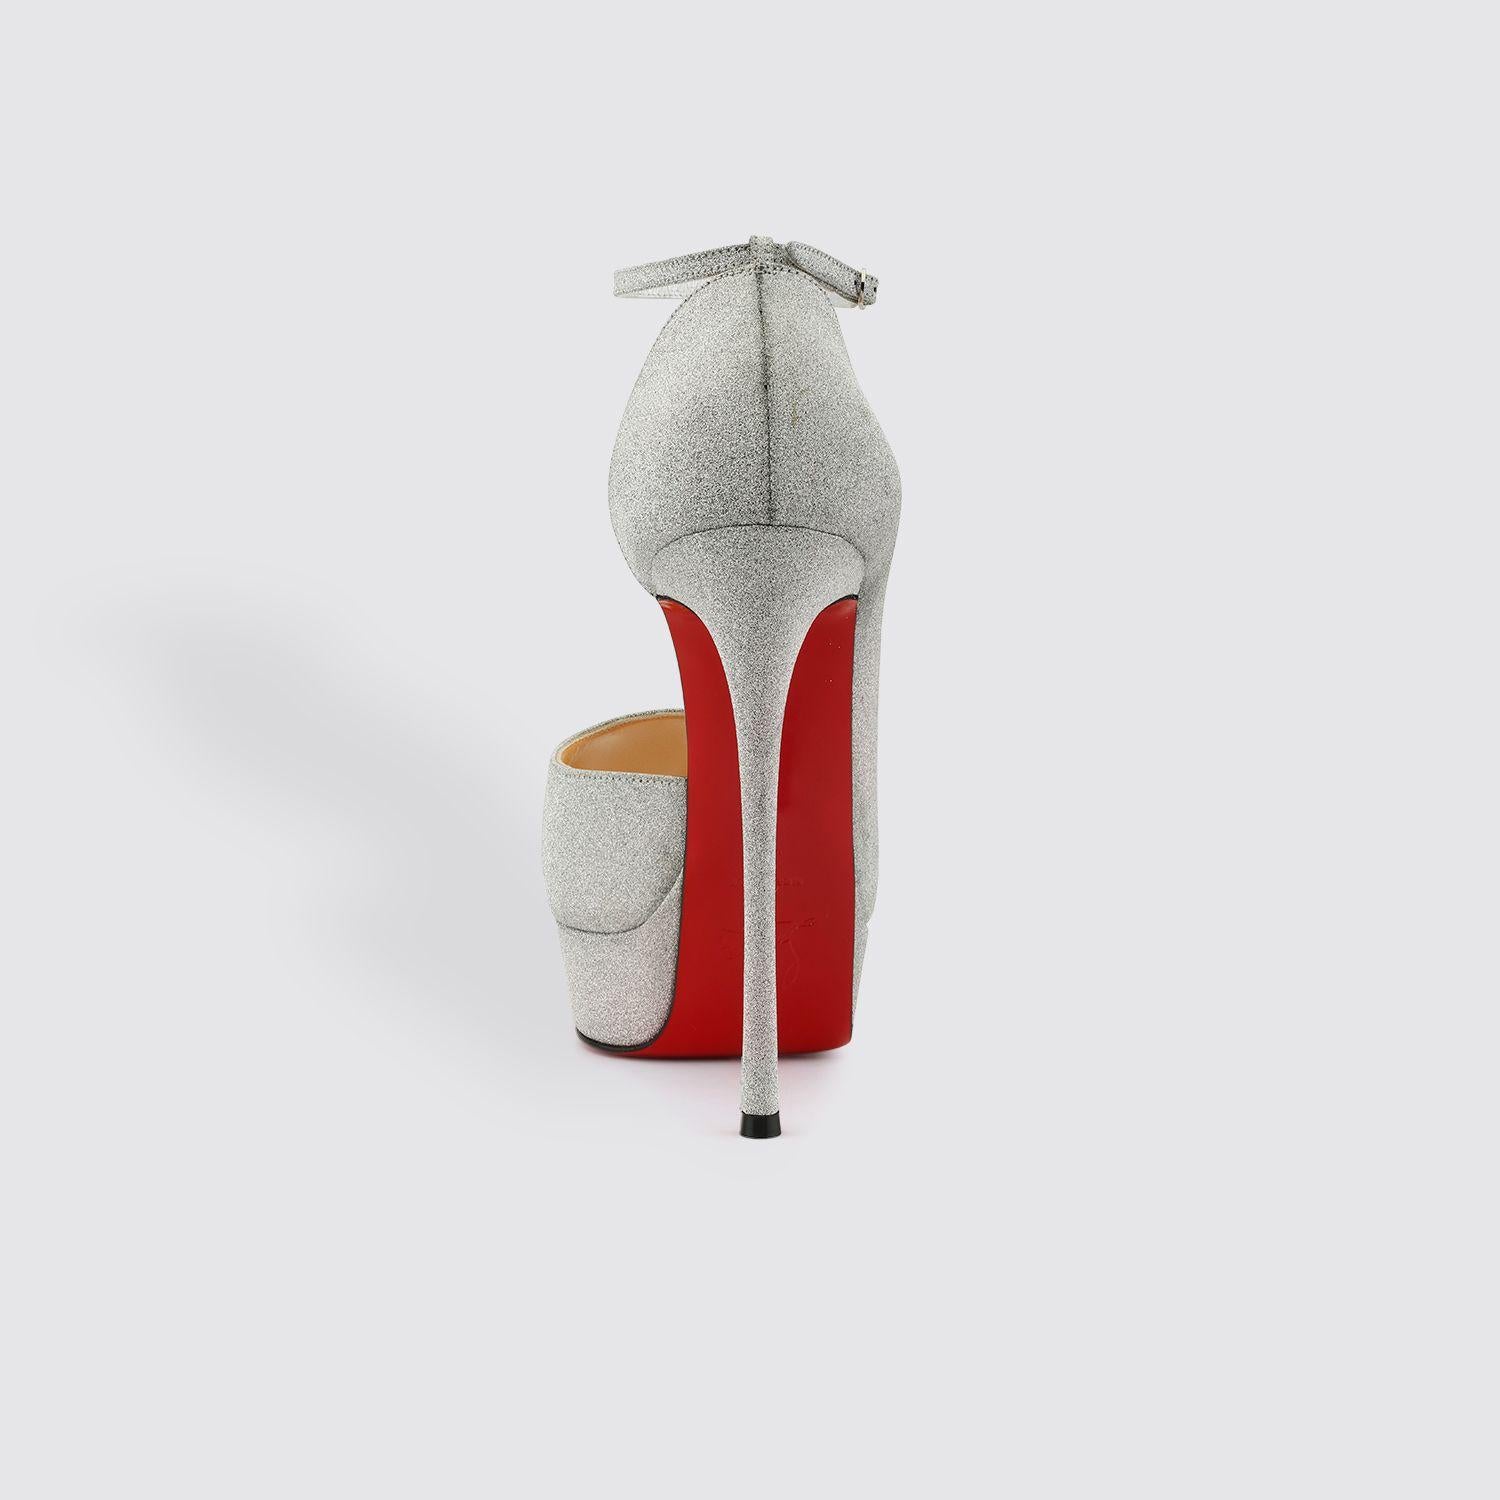 The Round Chick Alta pump is noted for its heart-shaped notches at the ankle and the tip of its bold cut. Its wedge sole rises to a 150 mm heel. It's sophisticated and elegant asymmetrical upper is underscored by discreet topstitching and enhanced